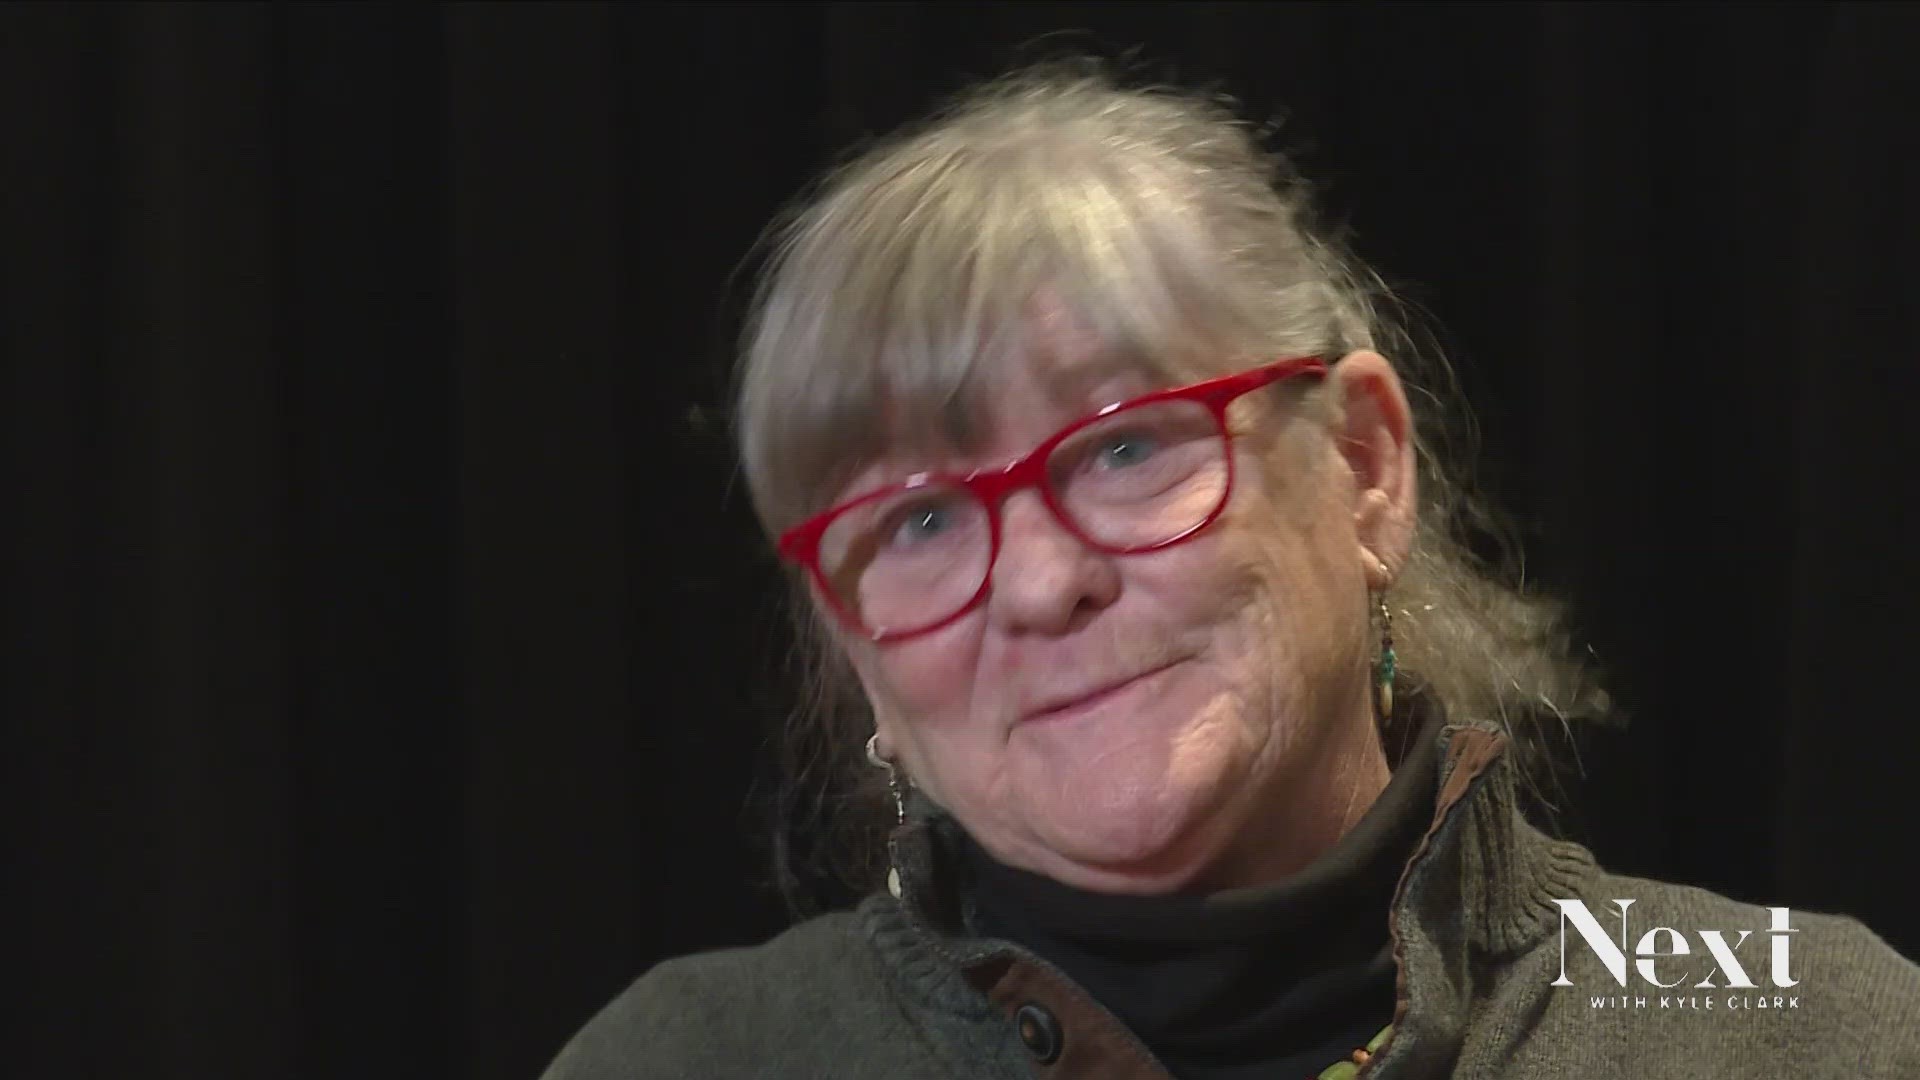 Claudia Carson is an integral part of the Denver Center for the Performing Arts. For her retirement, she was honored with an award for her work behind the scenes.